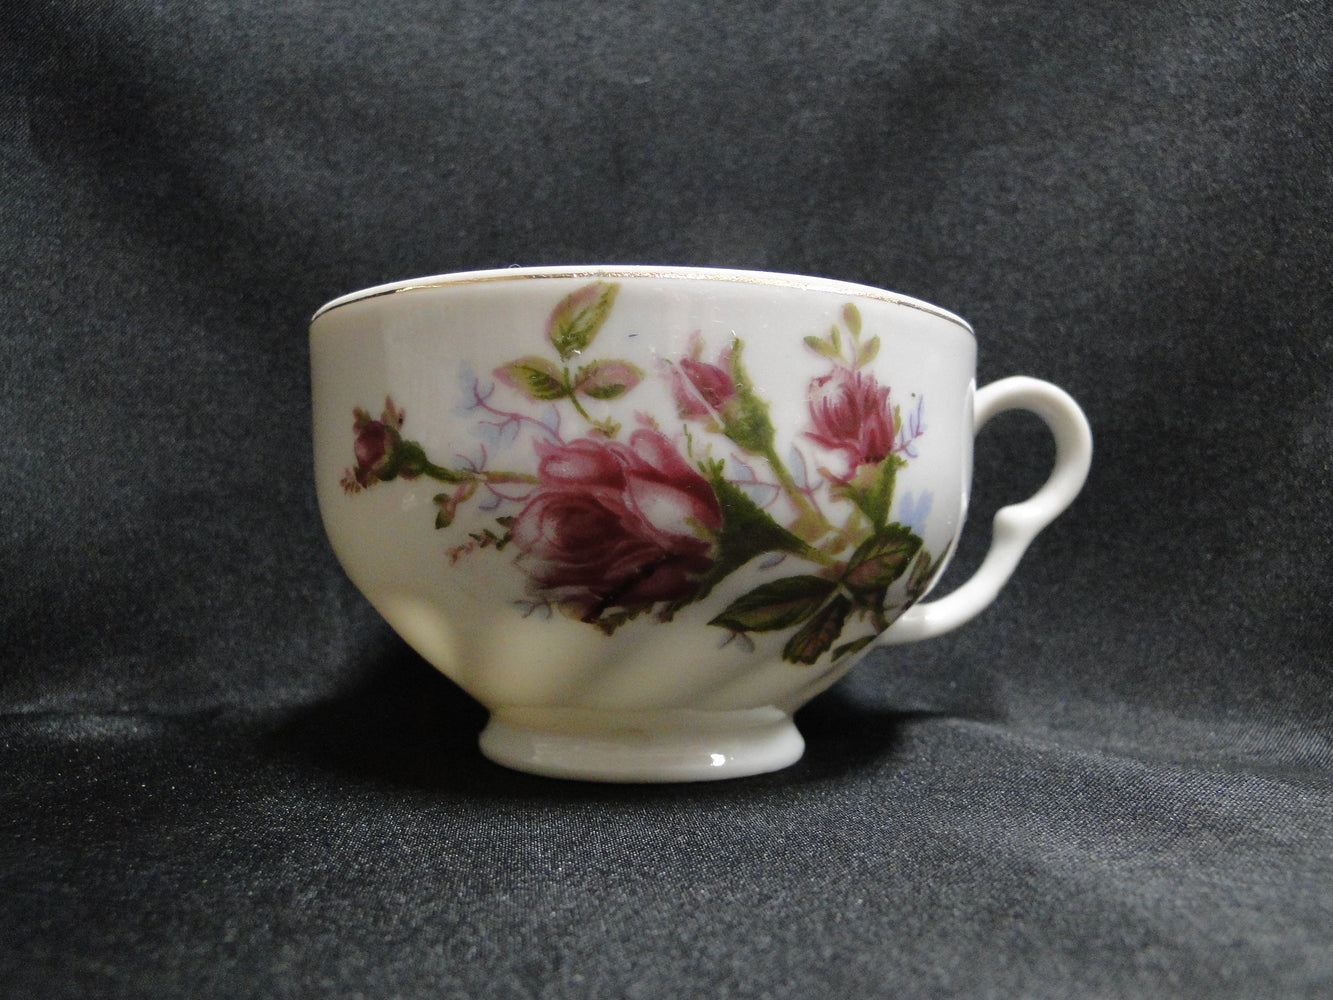 Moss Rose on White, Gold Trim: 2 1/4" Tall Cup (s) Only